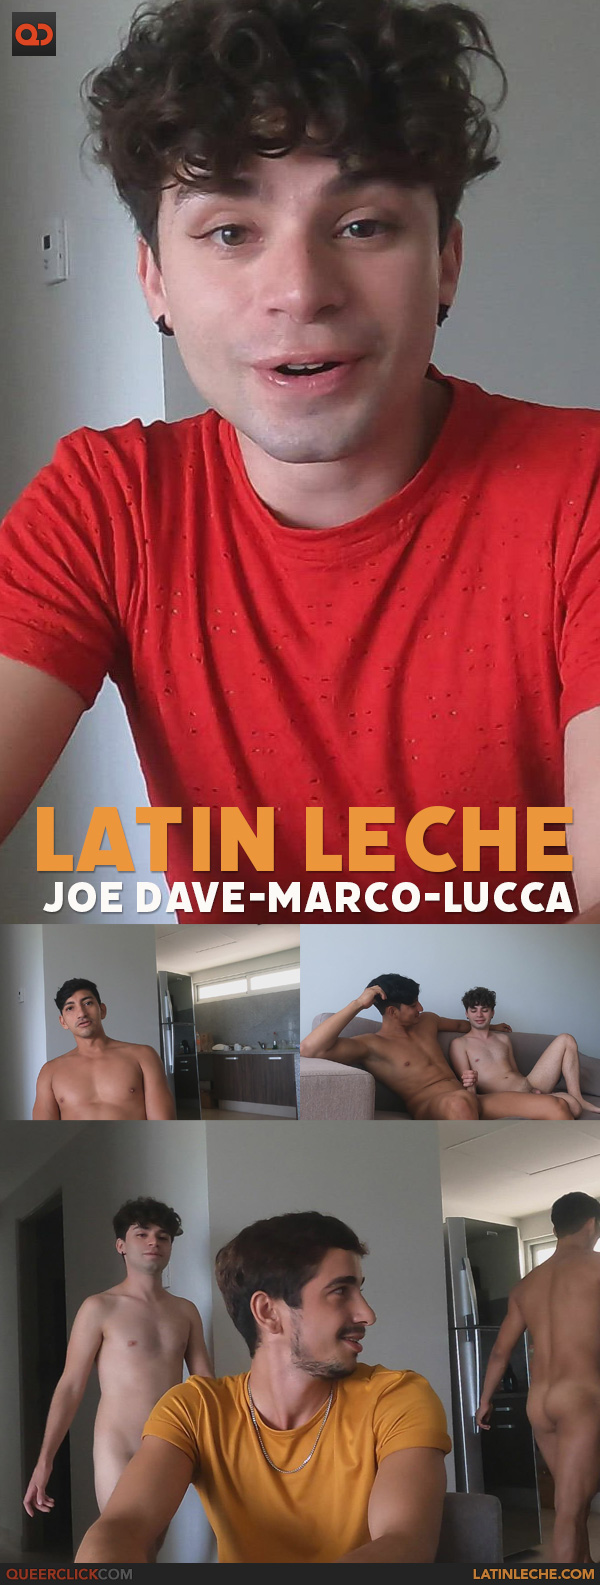 Say Uncle | Latin Leche: Joe Dave, Marco and Lucca